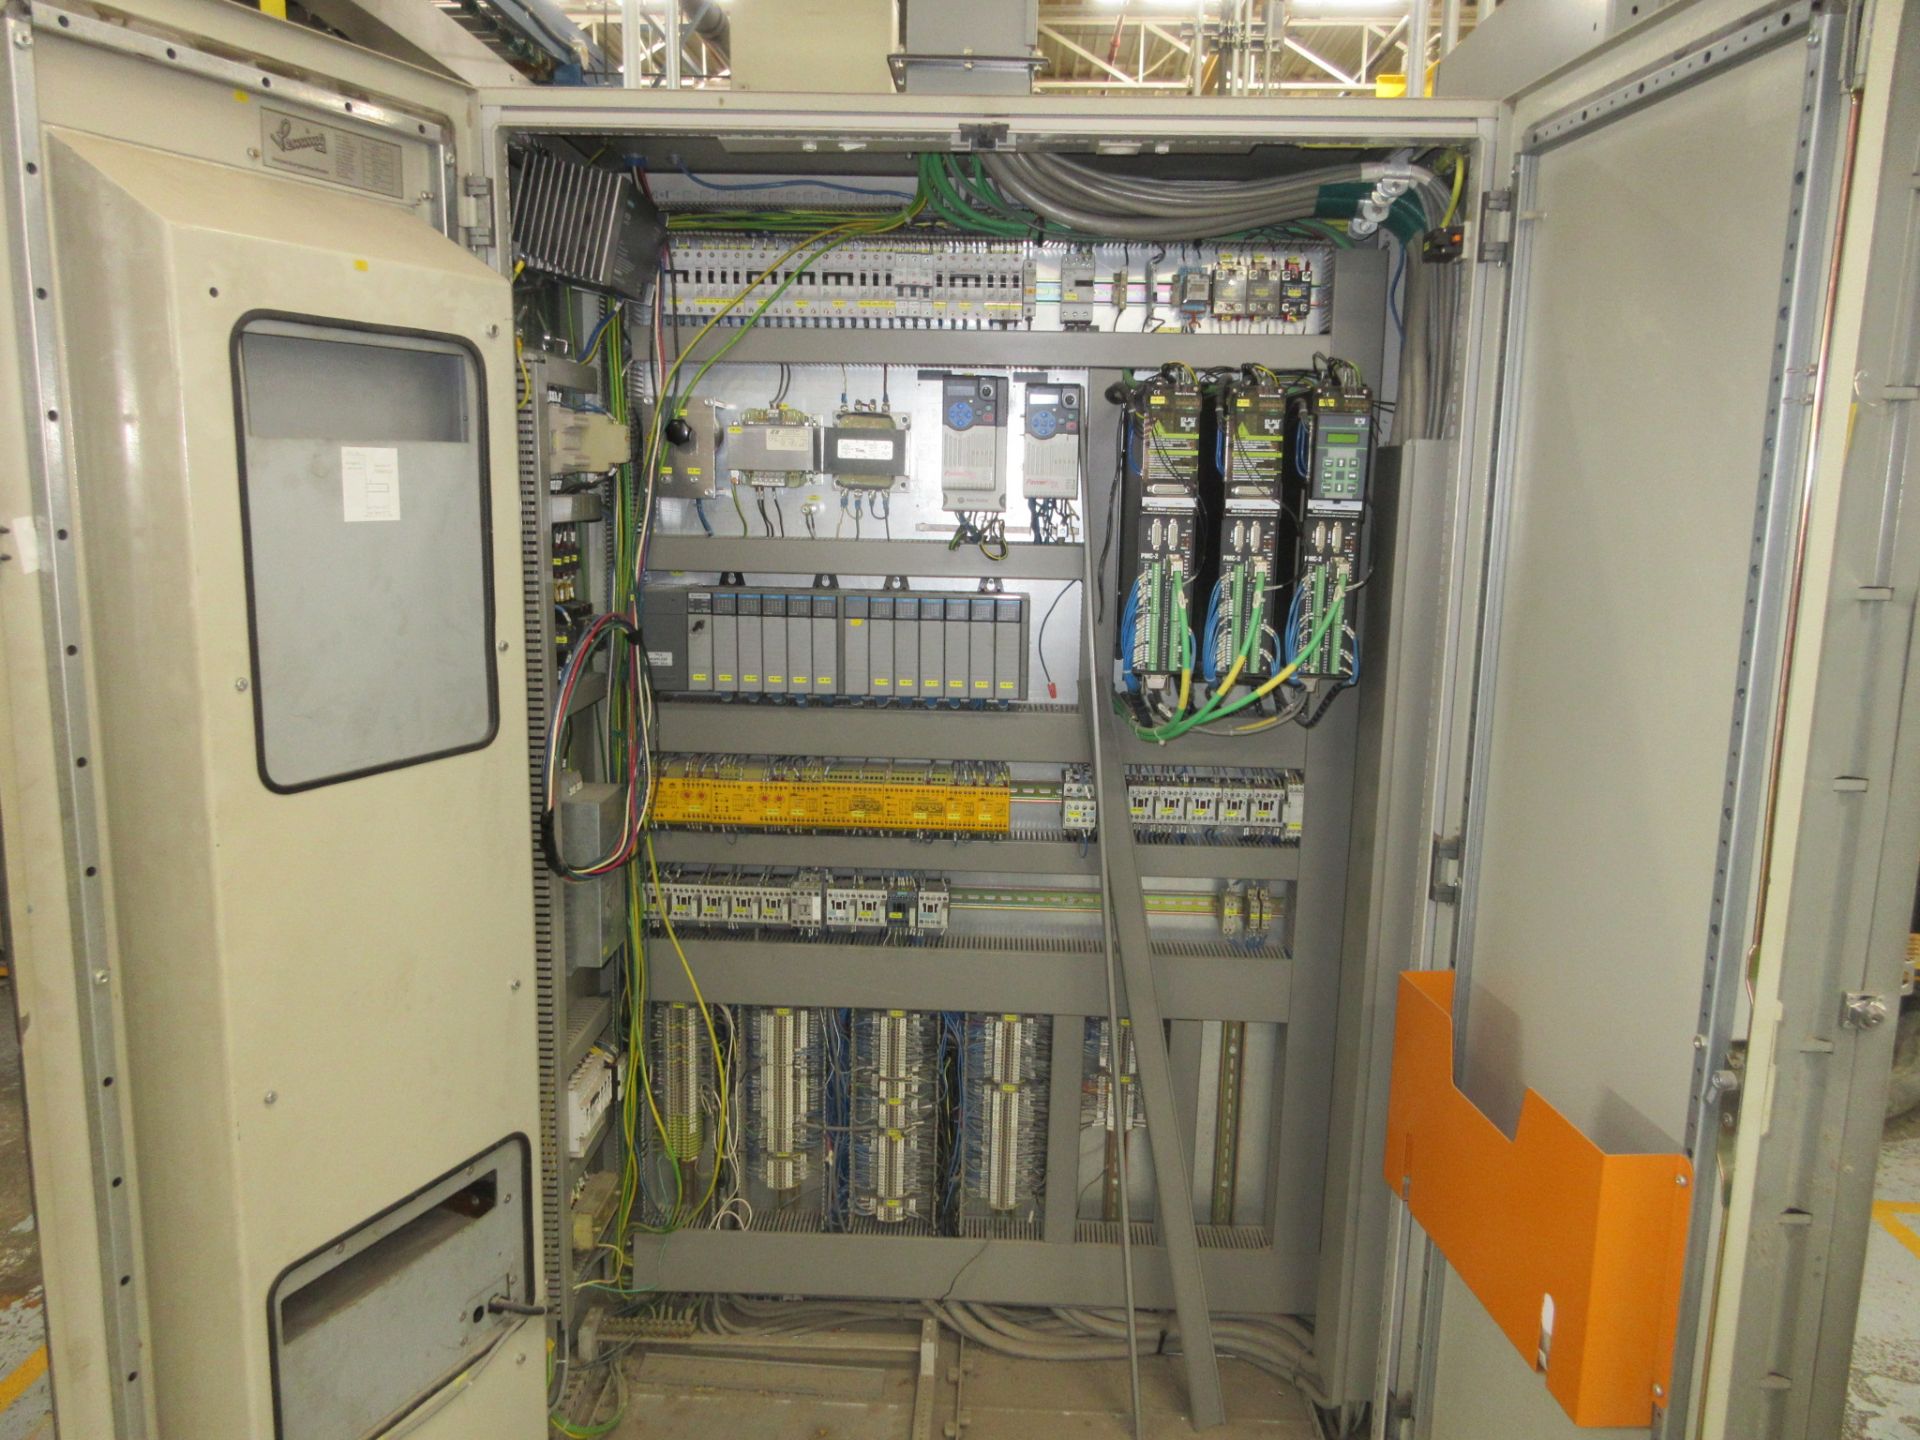 2002 SENNING WRAPPER ELECTRICAL CABINET (LAVAL 64)